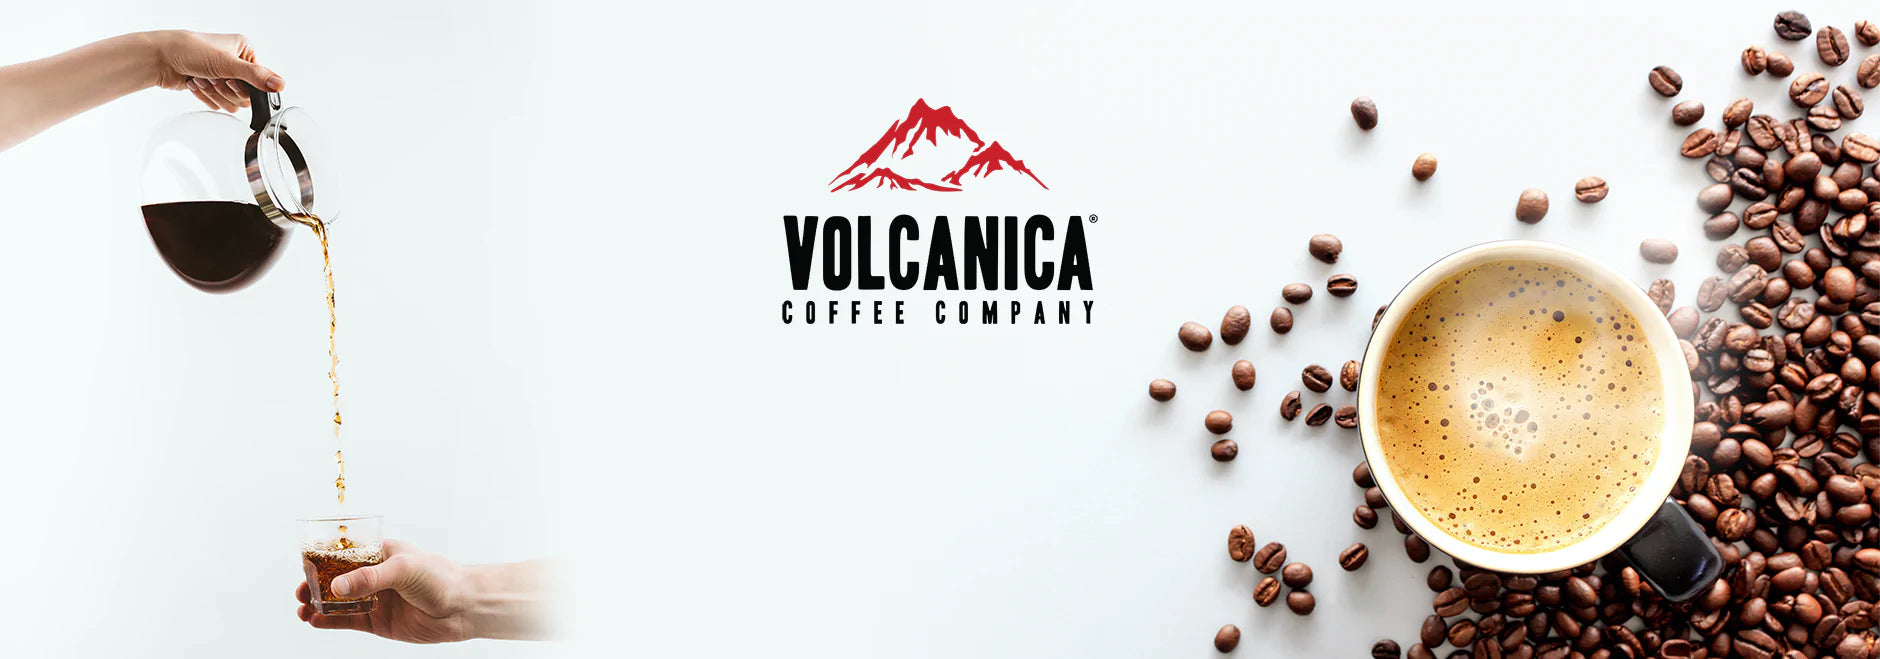 Volcanica Coffee - Memorial Day – 12% off all Coffees